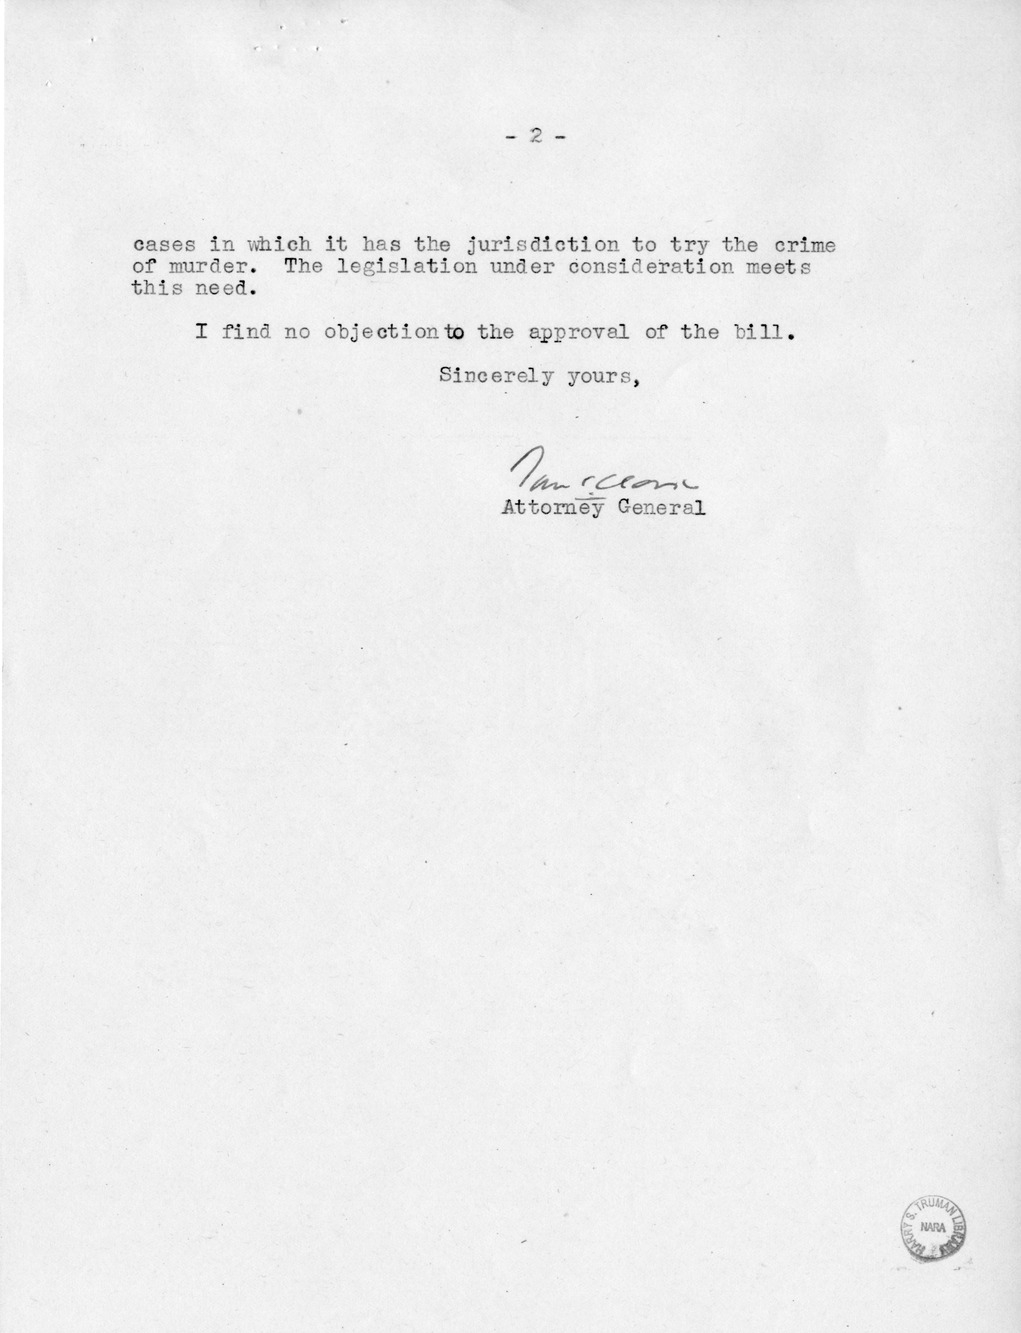 Memorandum from Frederick J. Bailey to M. C. Latta, S. 1308, To Amend Article 6 of the Articles for the Government of the Navy, with Attachments